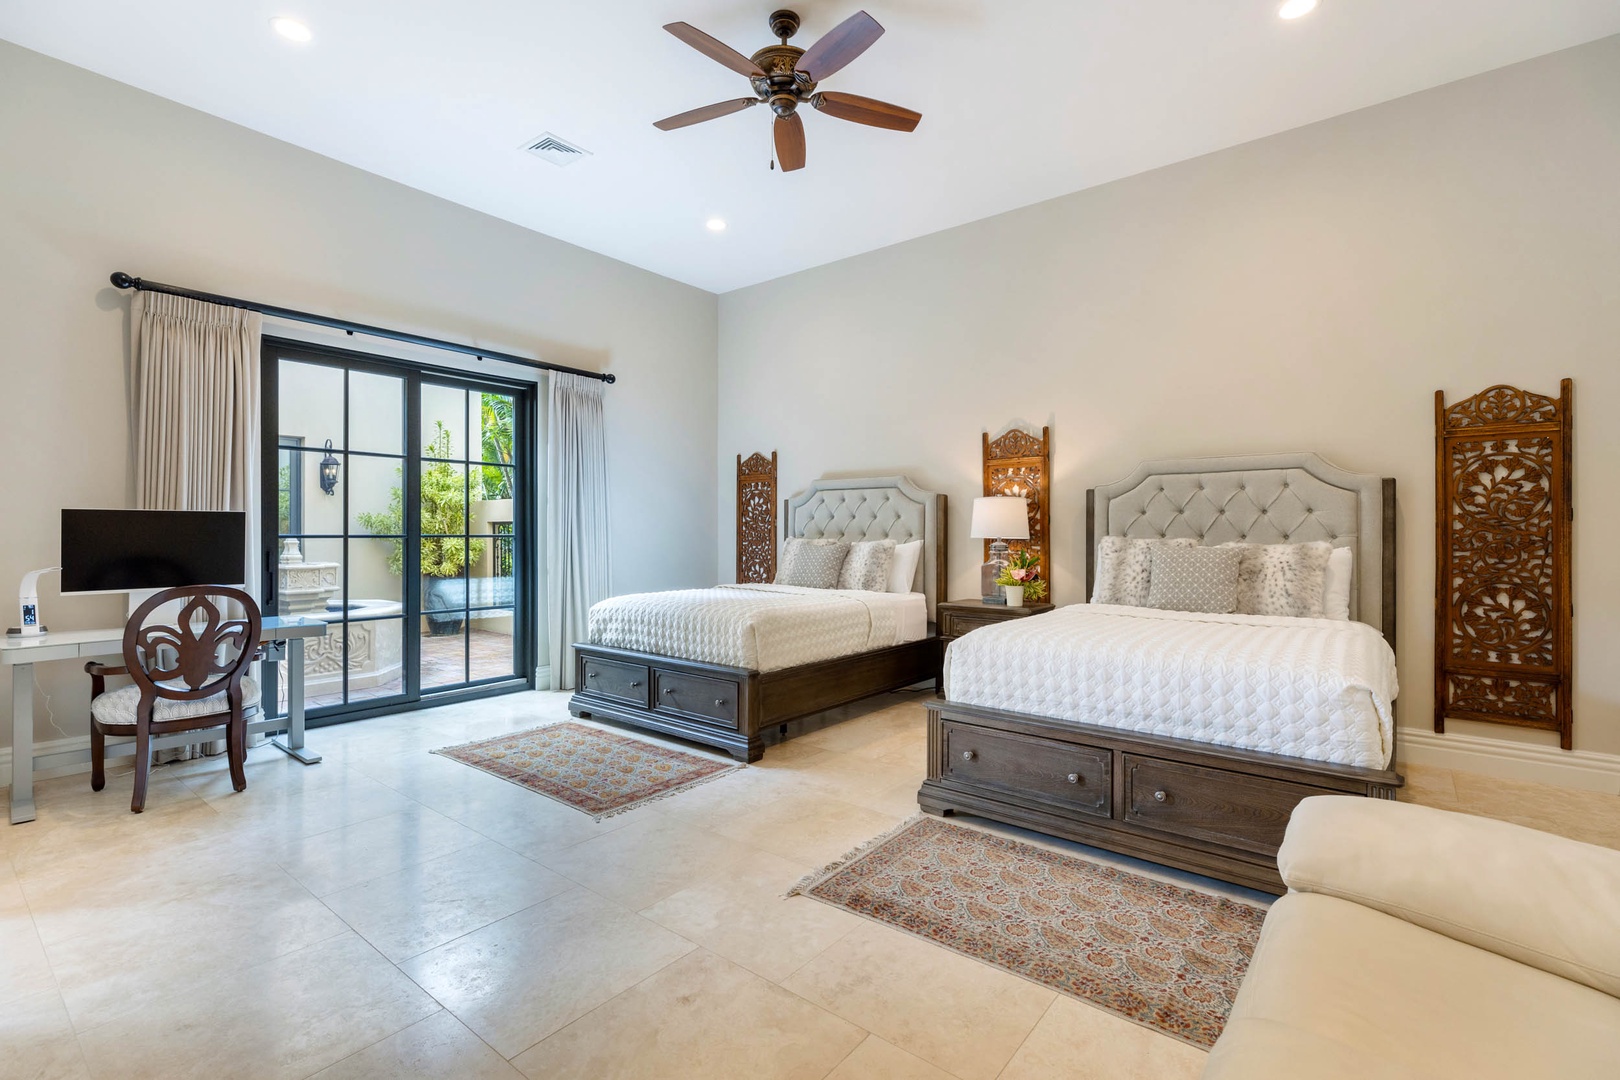 Honolulu Vacation Rentals, Royal Kahala Estate - Luxury guest bedroom  with two queen beds.